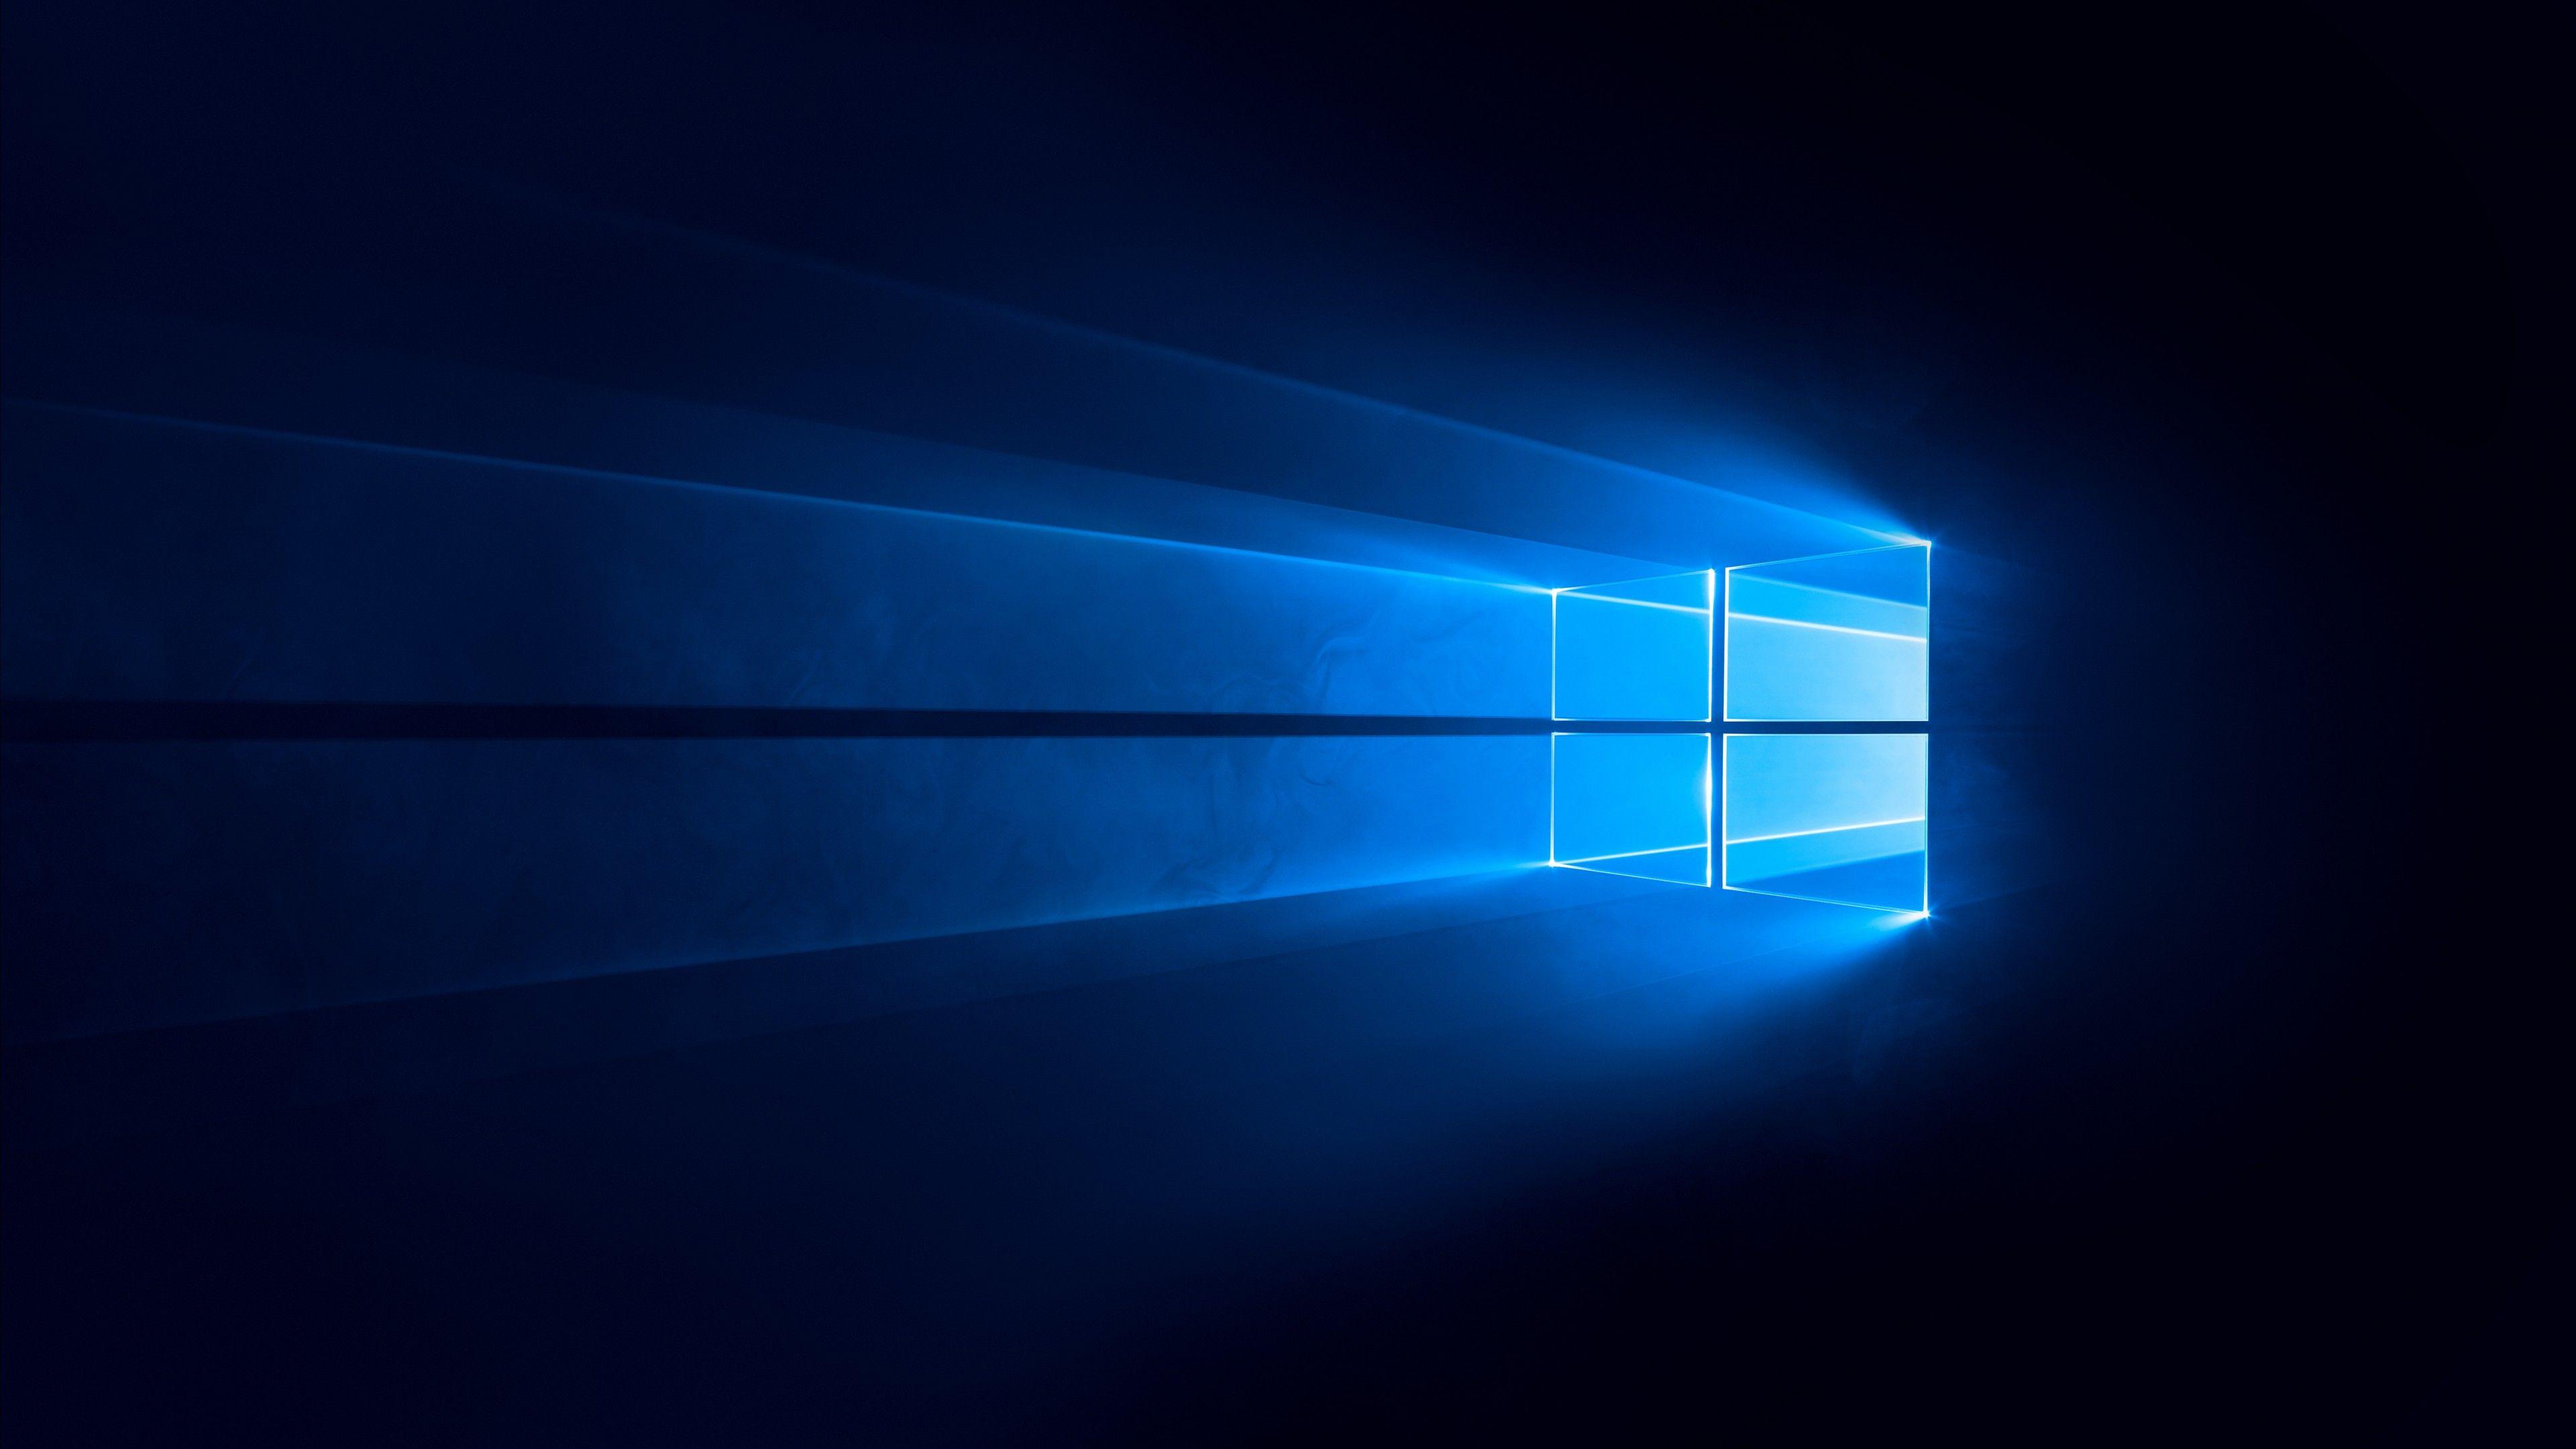 Windows 10 Blue Wallpapers - Top Free Windows 10 Blue Backgrounds